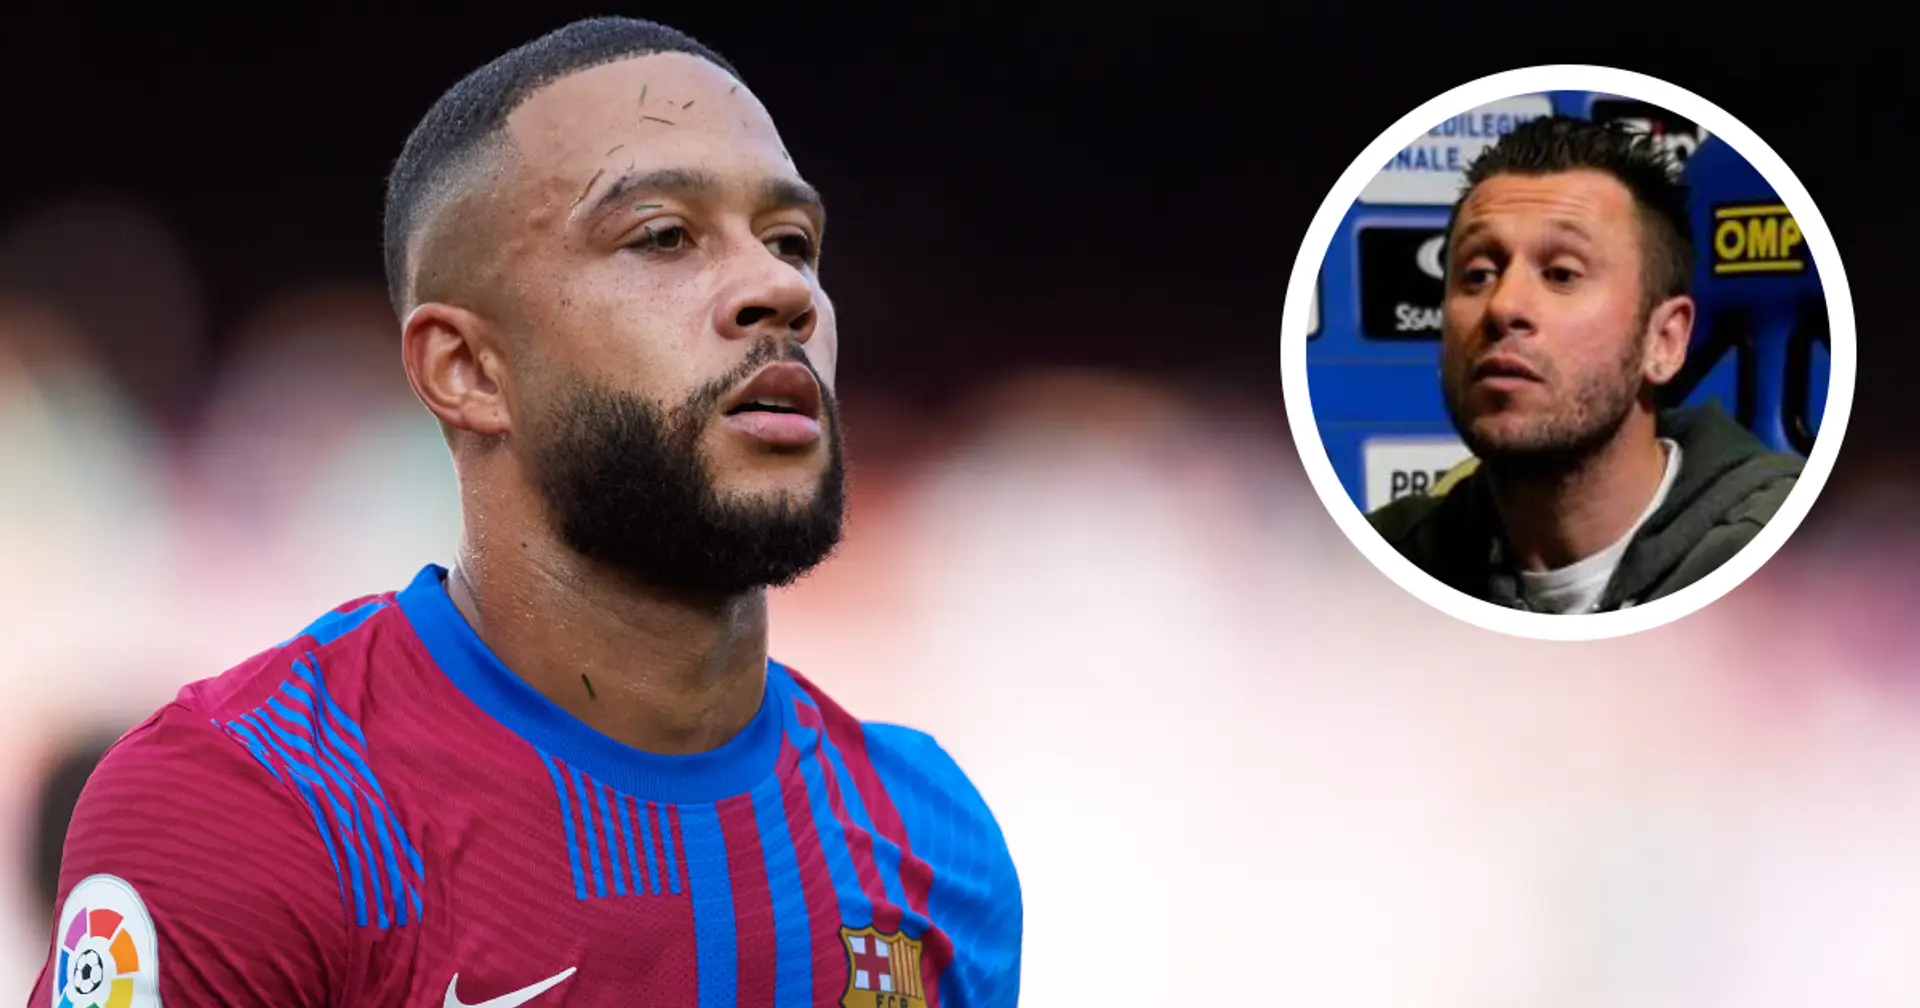 'He feels like he is Messi and Cristiano': ex-La Liga striker Cassano claims Memphis is not Barca quality